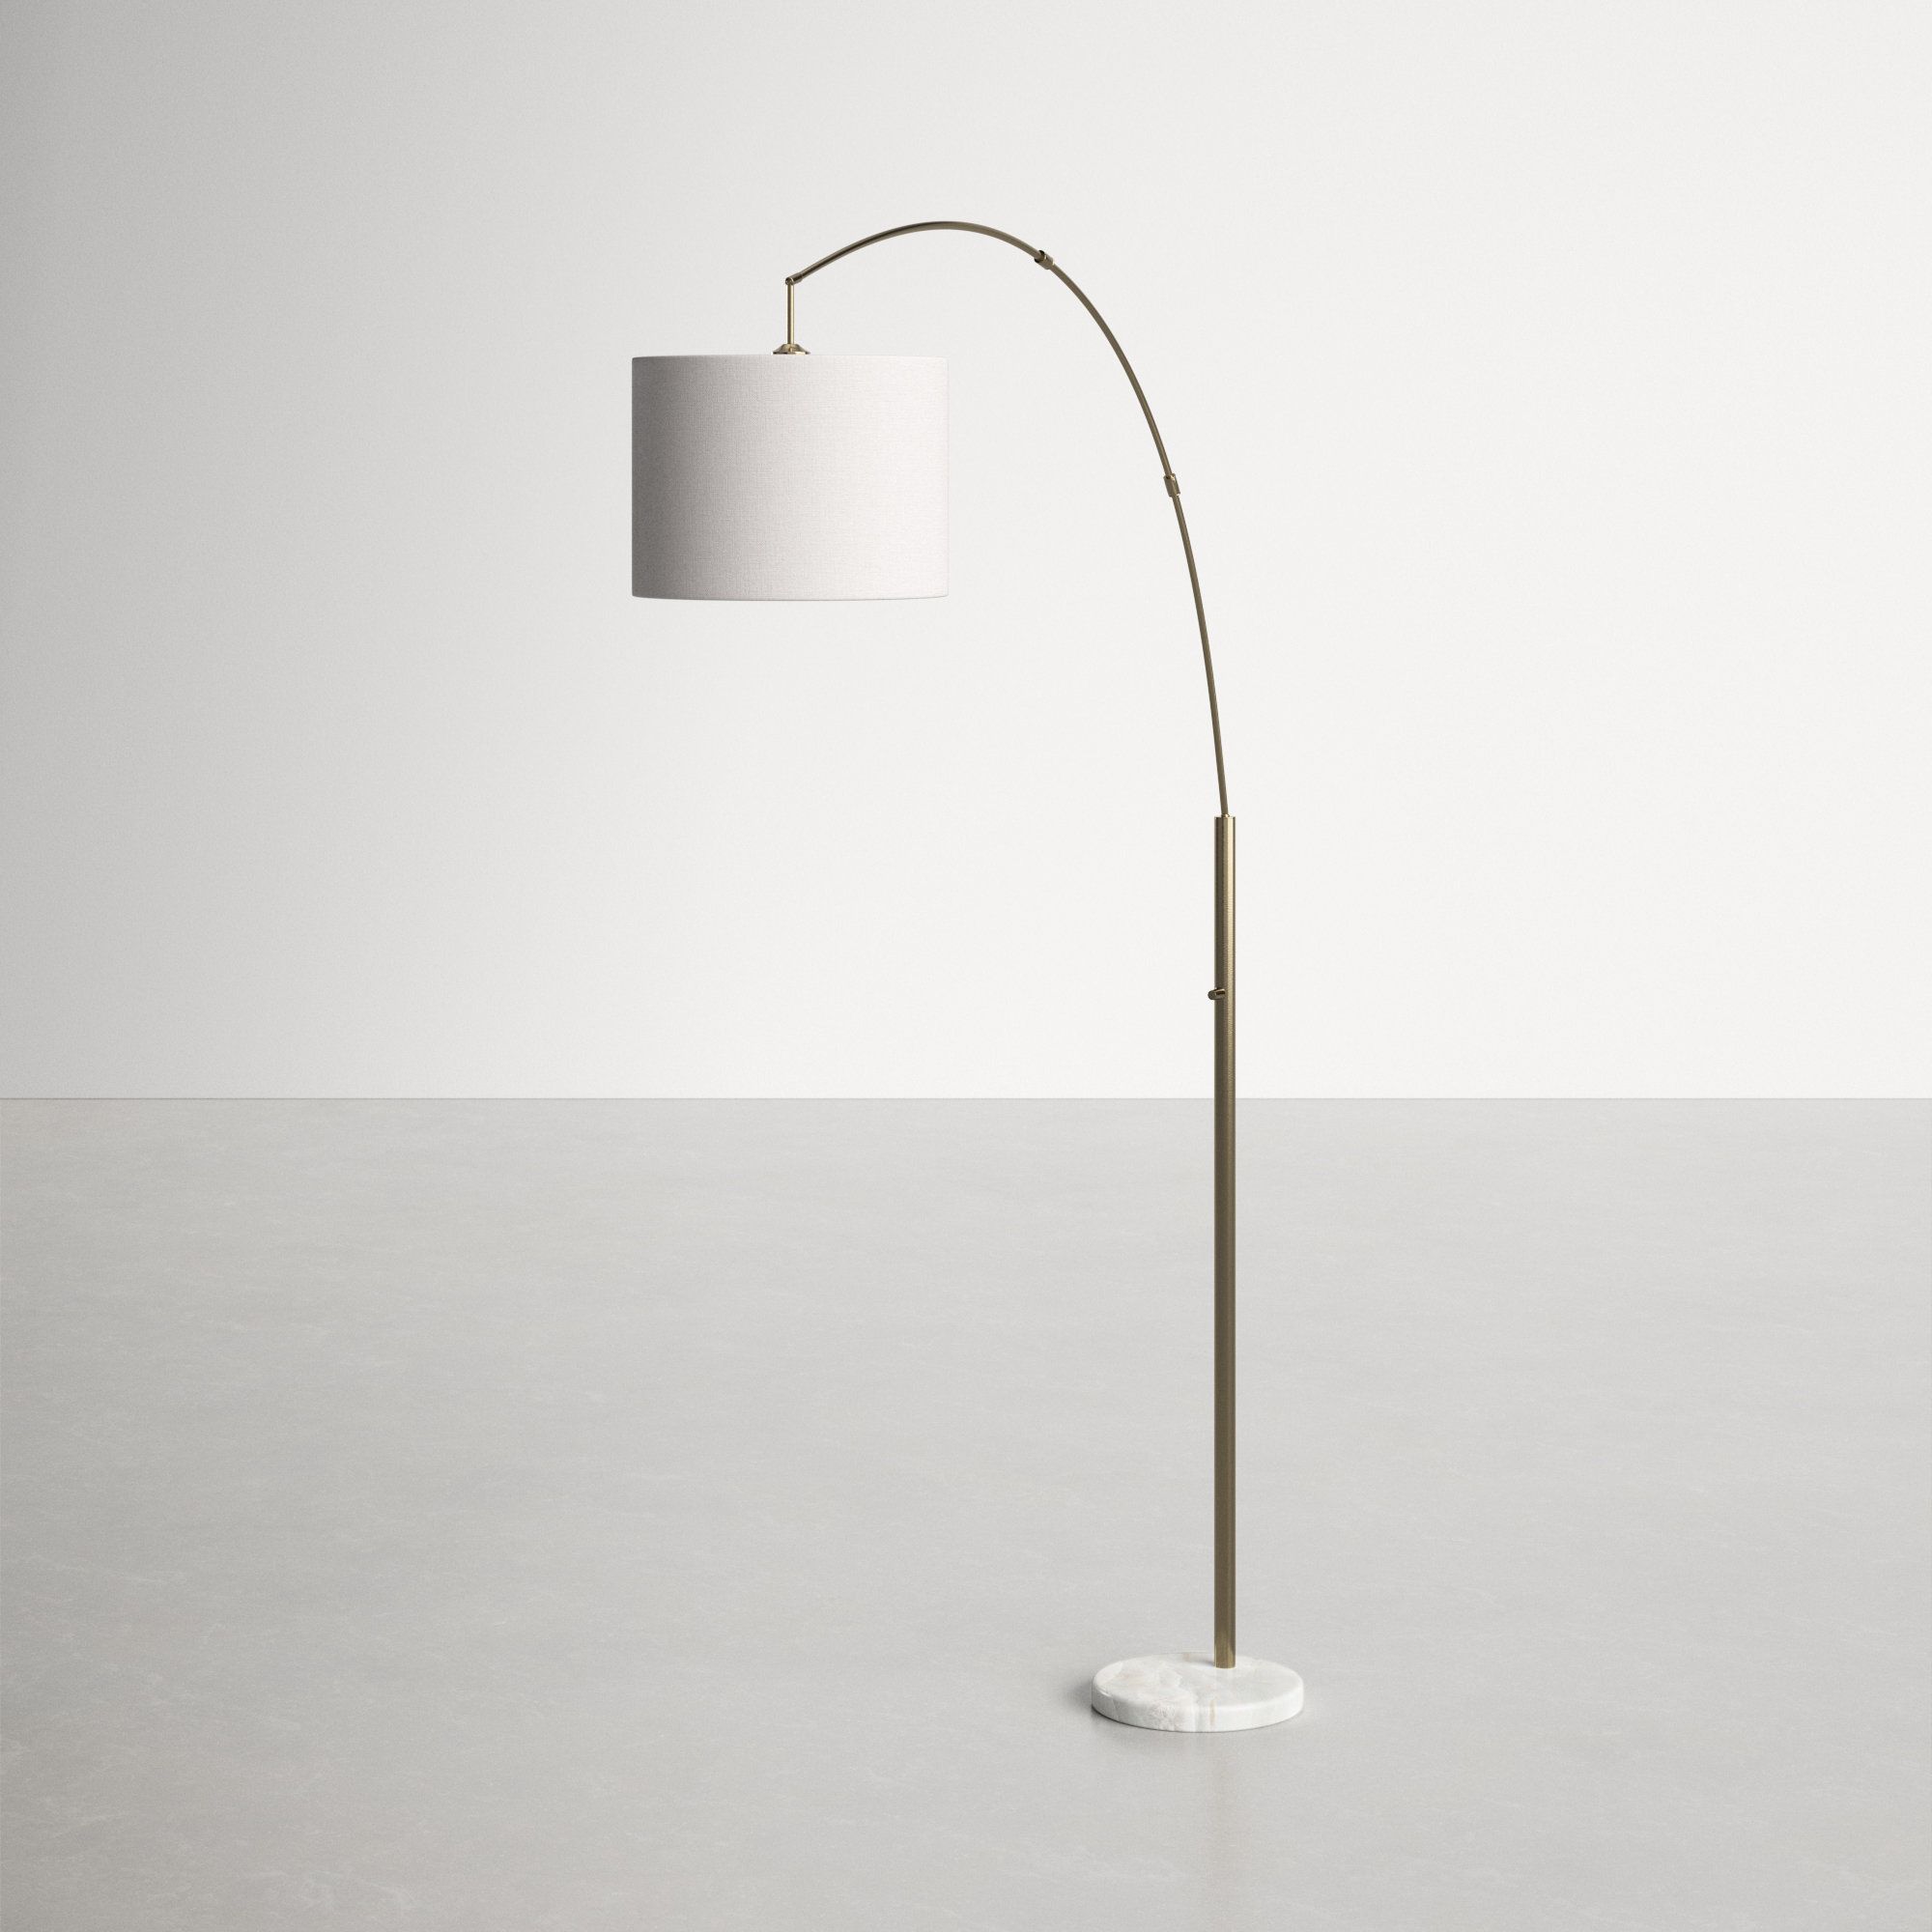 Allmodern Throughout Widely Used Grey Shade Floor Lamps (View 8 of 15)